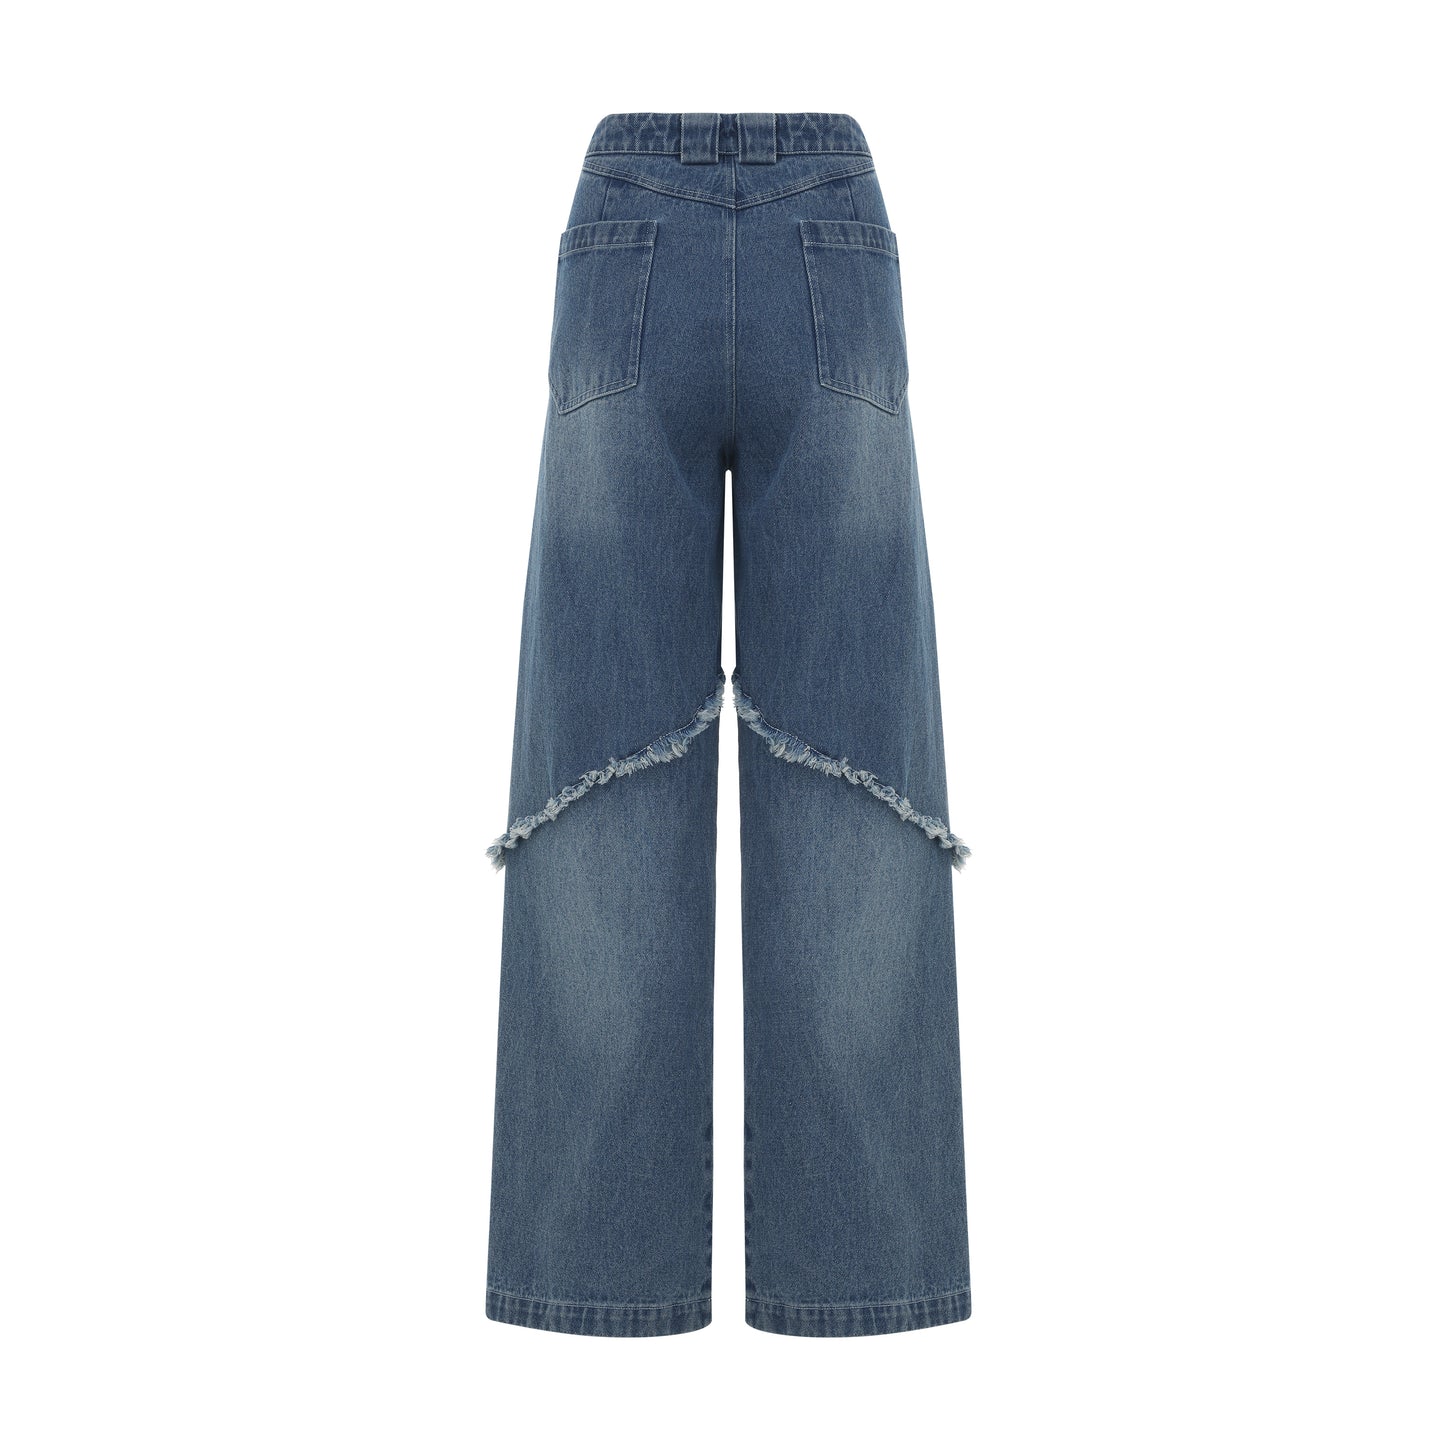 Spiral Cut Washed Jeans